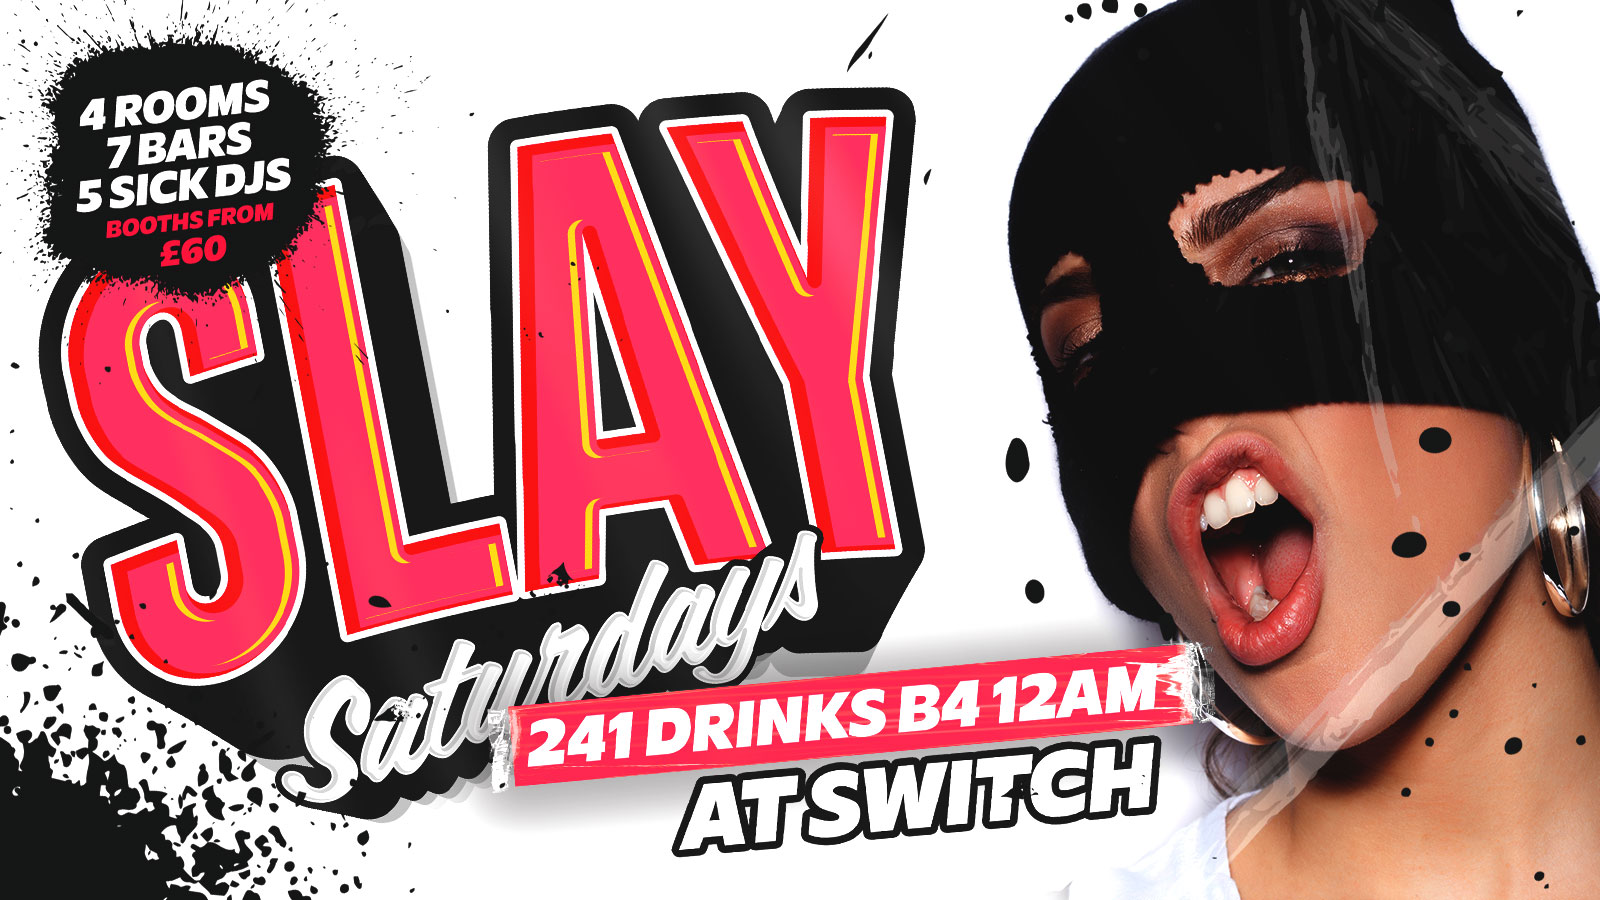 SLAY Saturdays at SWITCH | 4 Rooms, 241 Drinks B4 12am + £3 Tickets